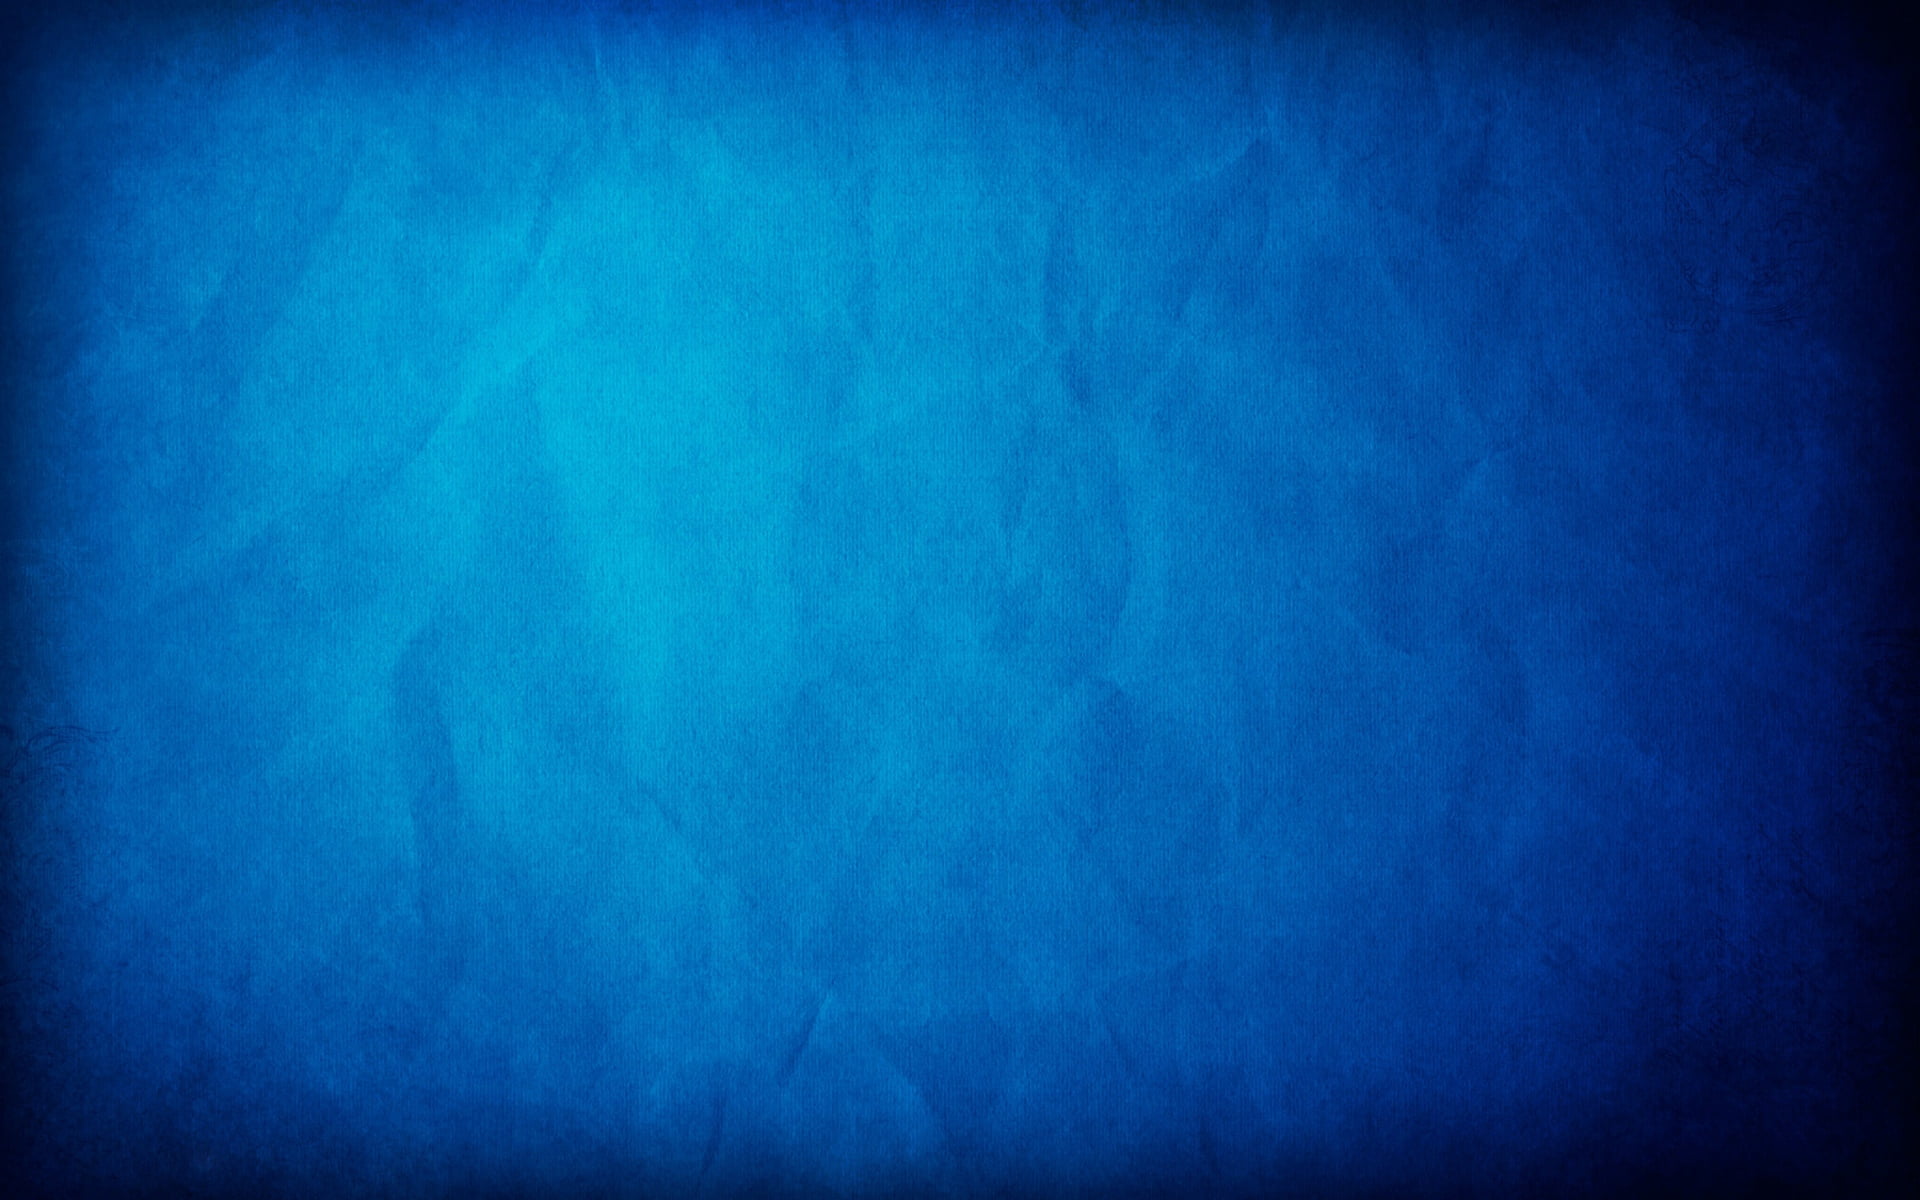 paper, light, shadow, color, backgrounds, blue, abstract, textured